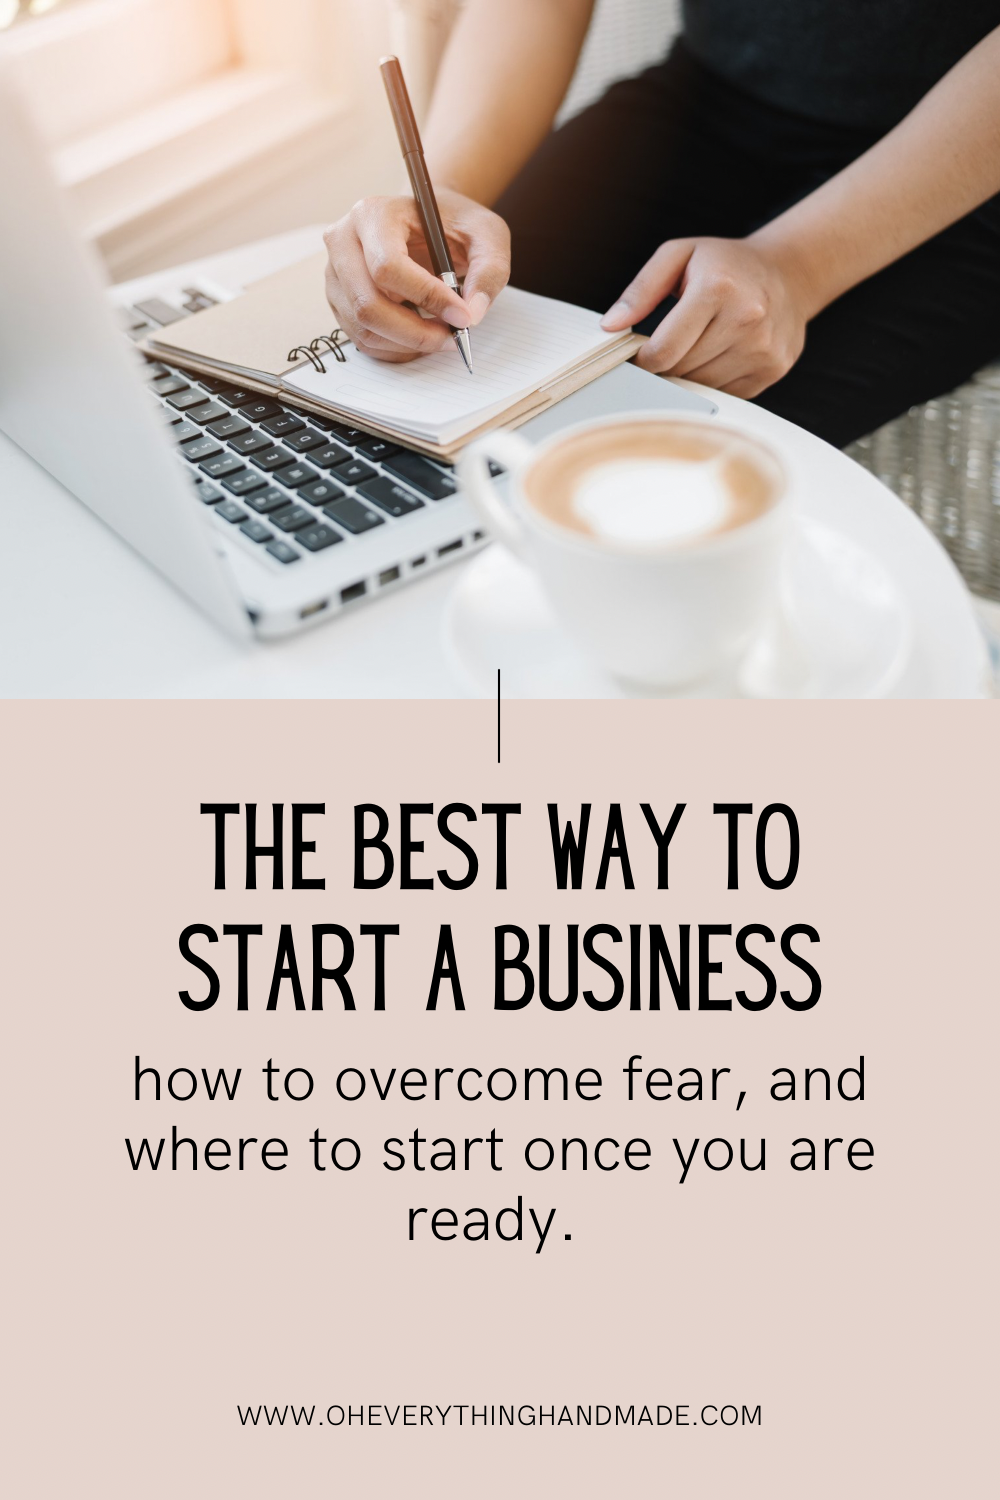 What’s The Best Way To Start A Business